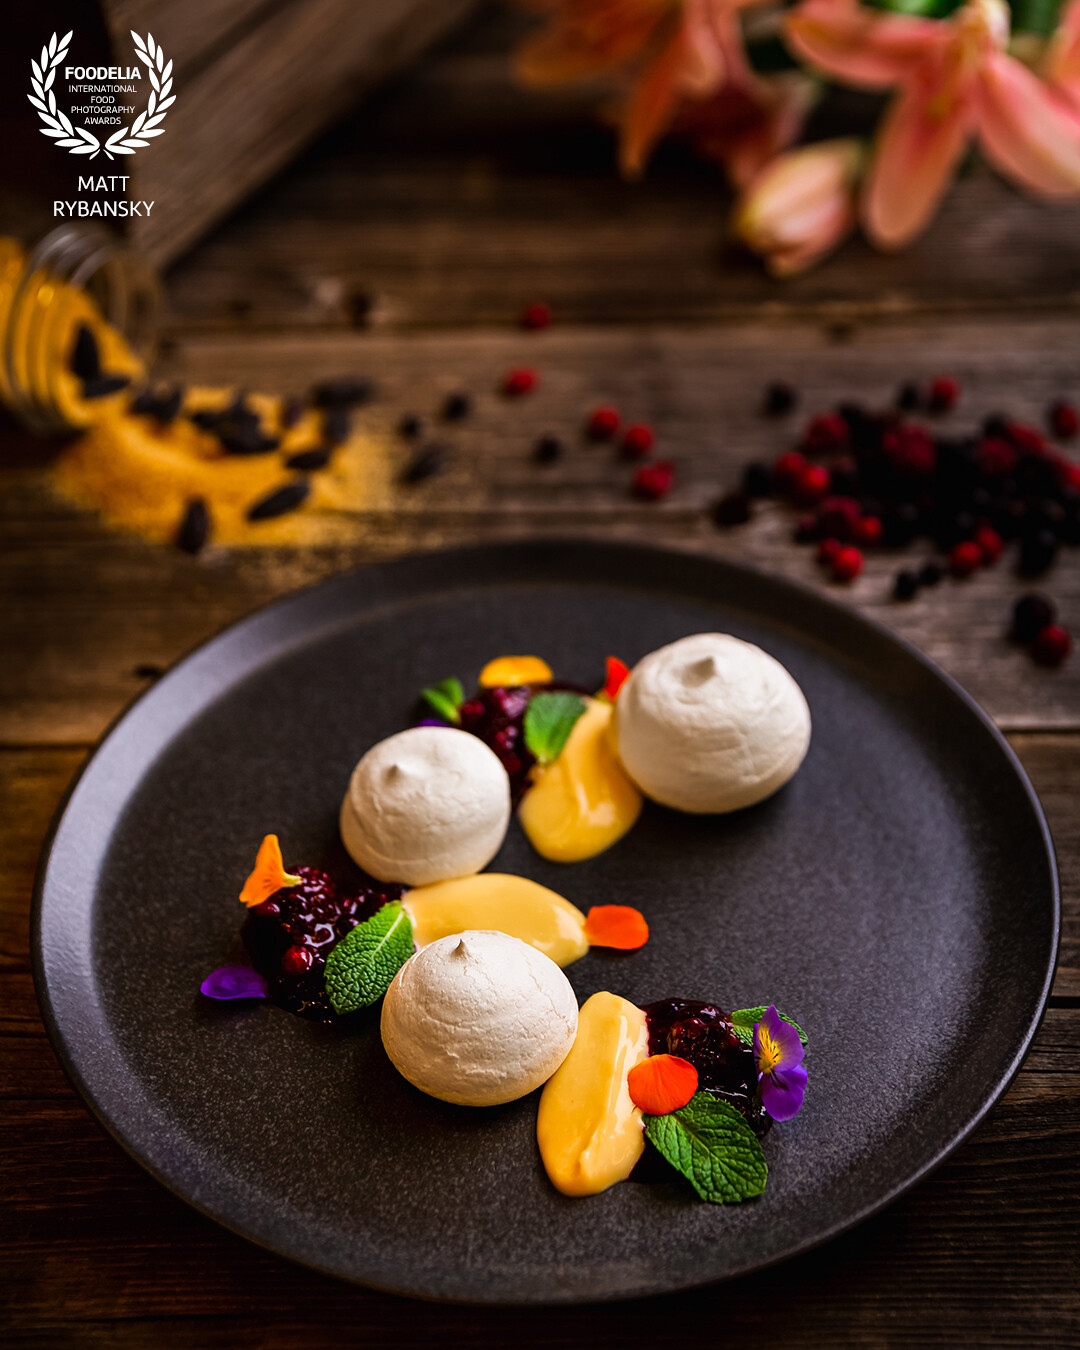 This was an incredible photoshooting of new French menu for Slovak Mercure Hotel, now known as @clarioncongresshotelbratislava. <br />
<br />
Bratislava, Slovakia